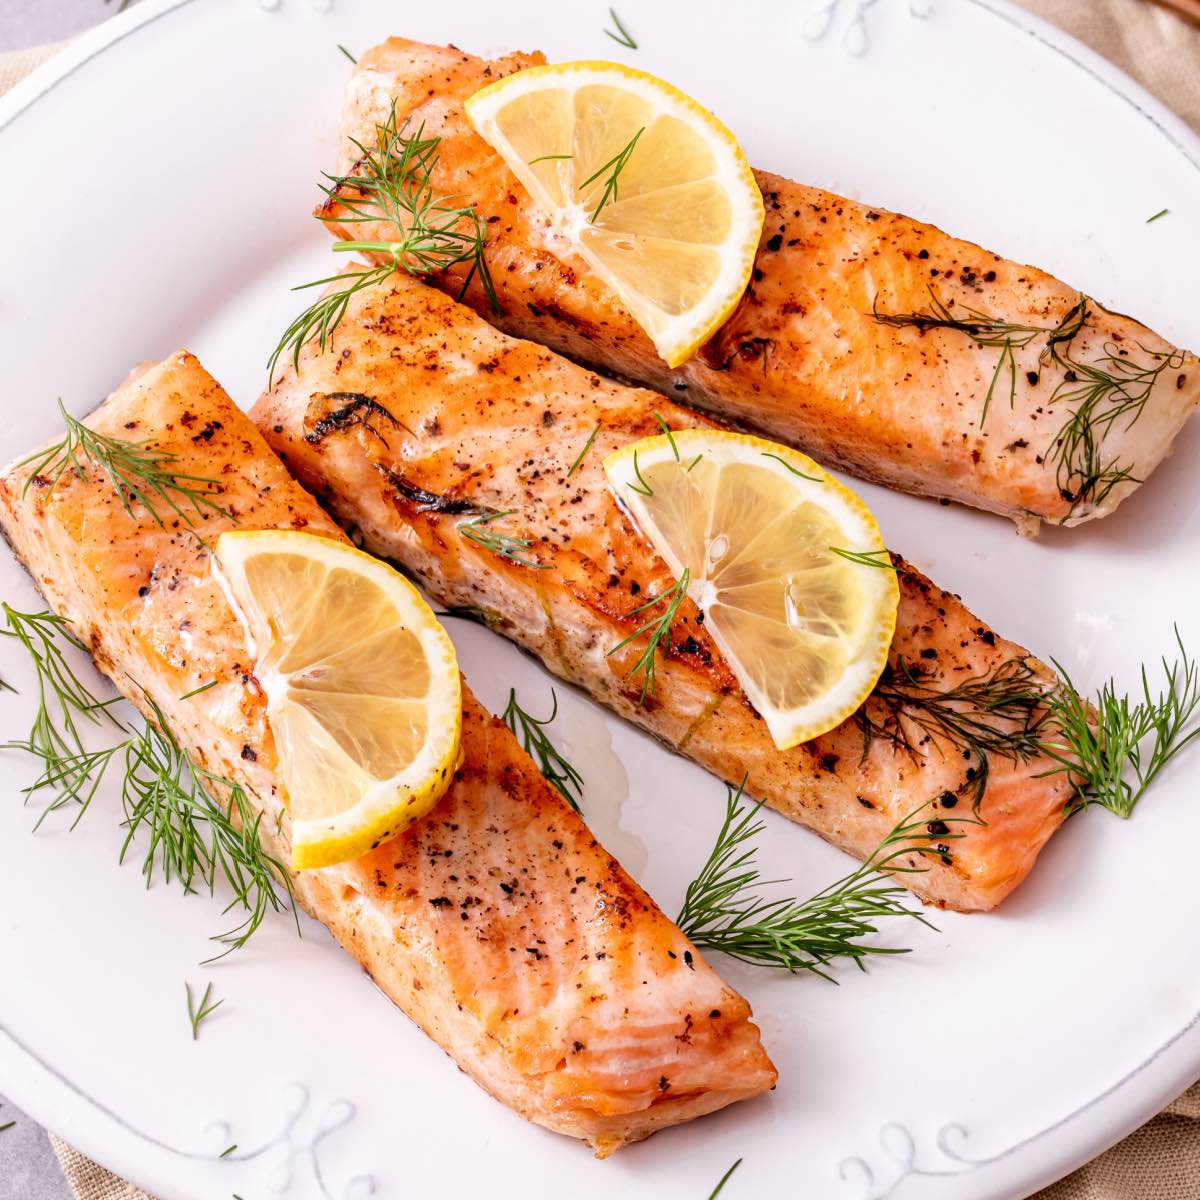 The Perfect Baked Salmon Recipe for Busy Weeknights